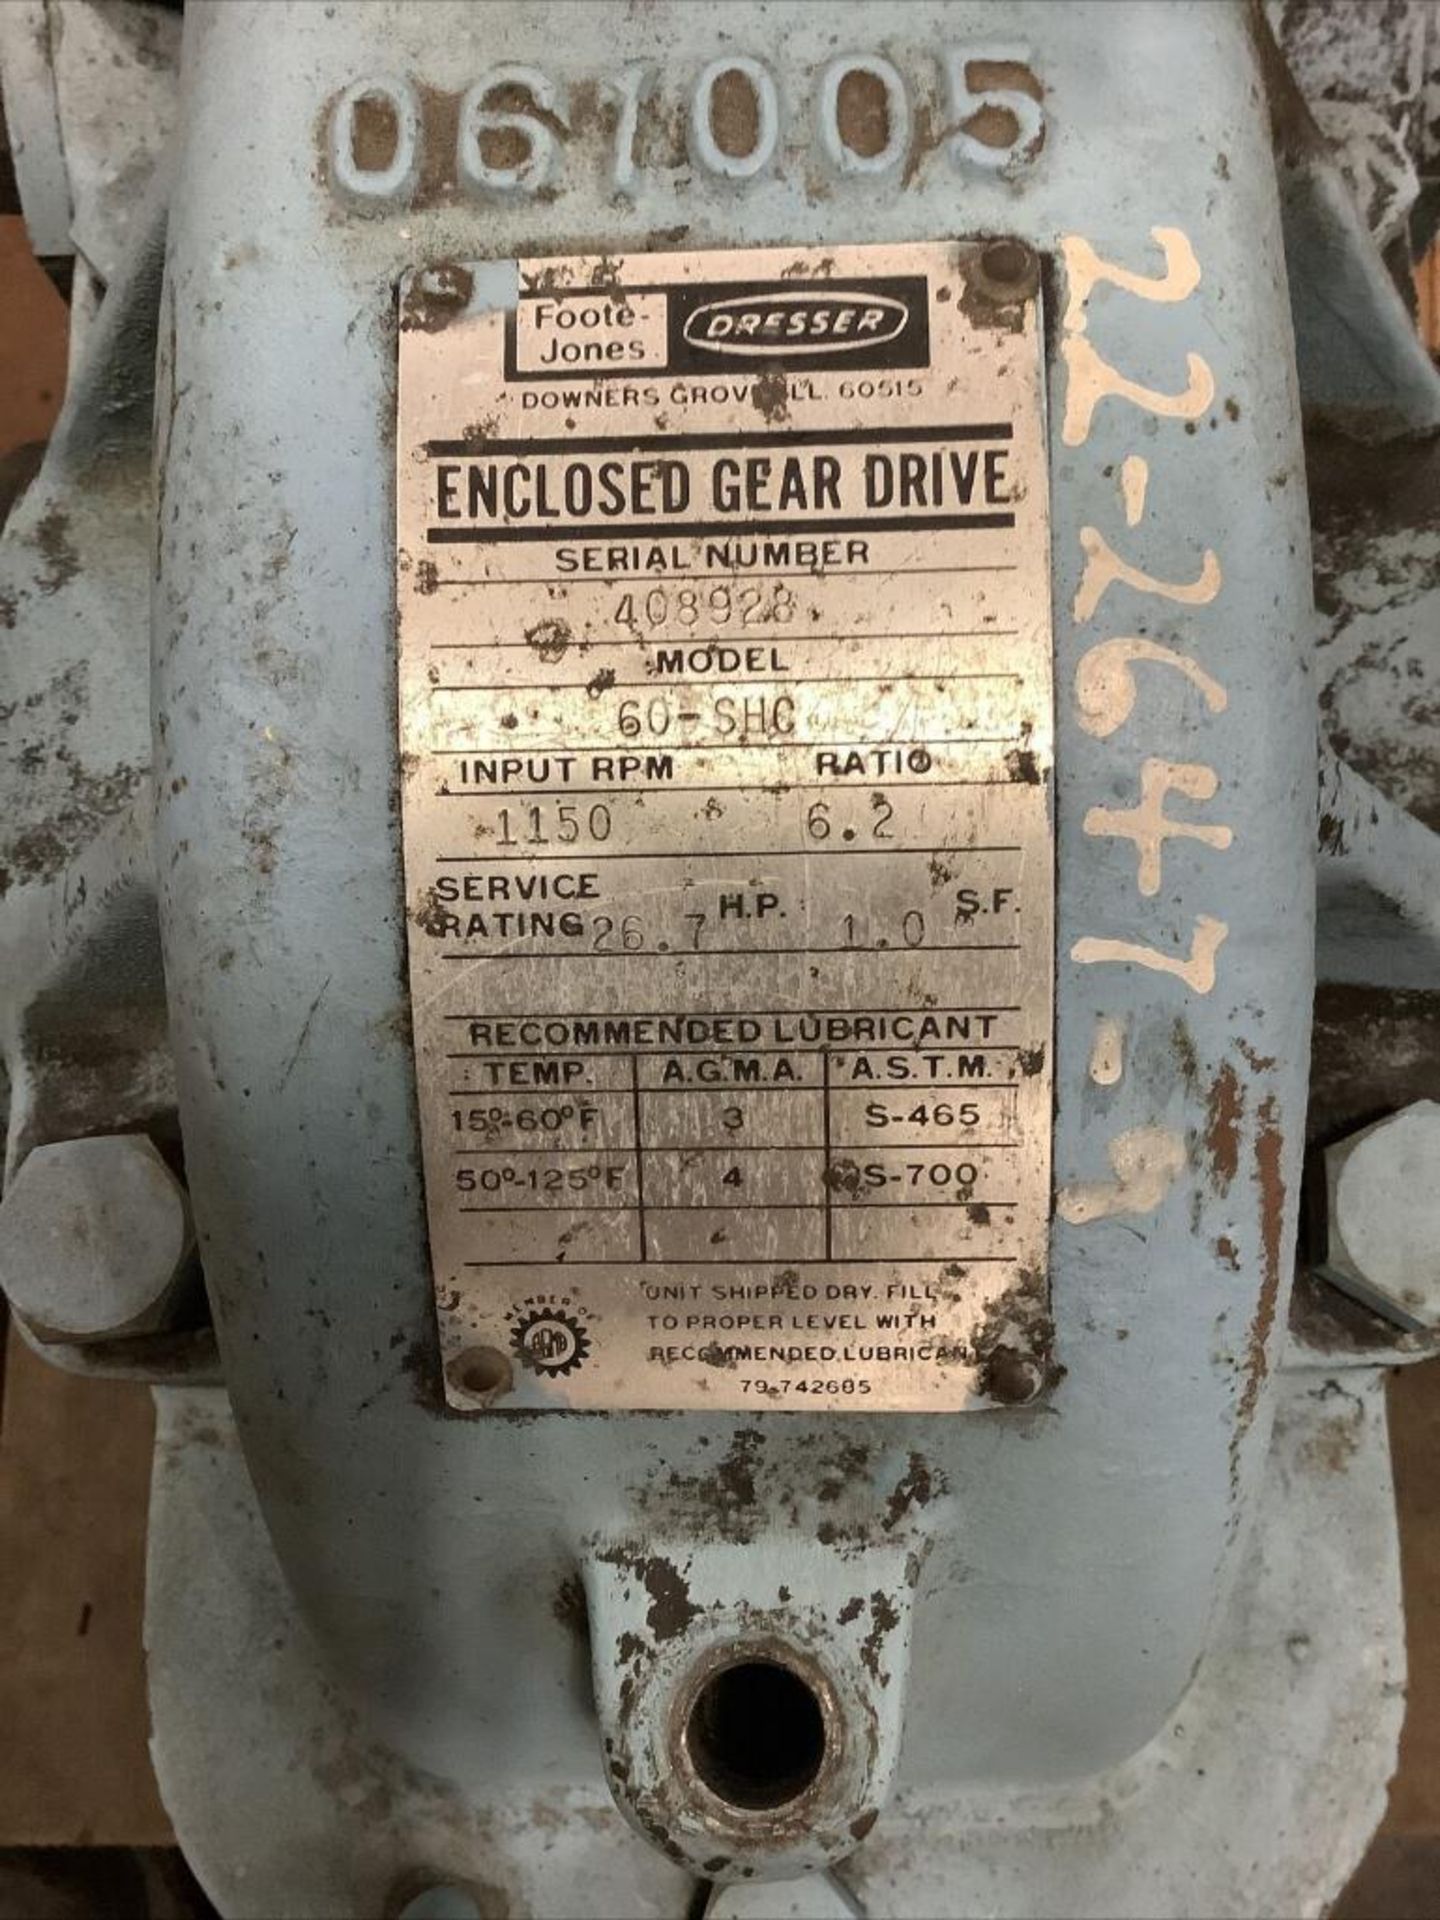 DRESSER 60-SHC GEARBOX 1150RPM 6.2 RATIO SERVICE RATING 26.7HP 1.0SF LOT OF 2 - Image 7 of 7